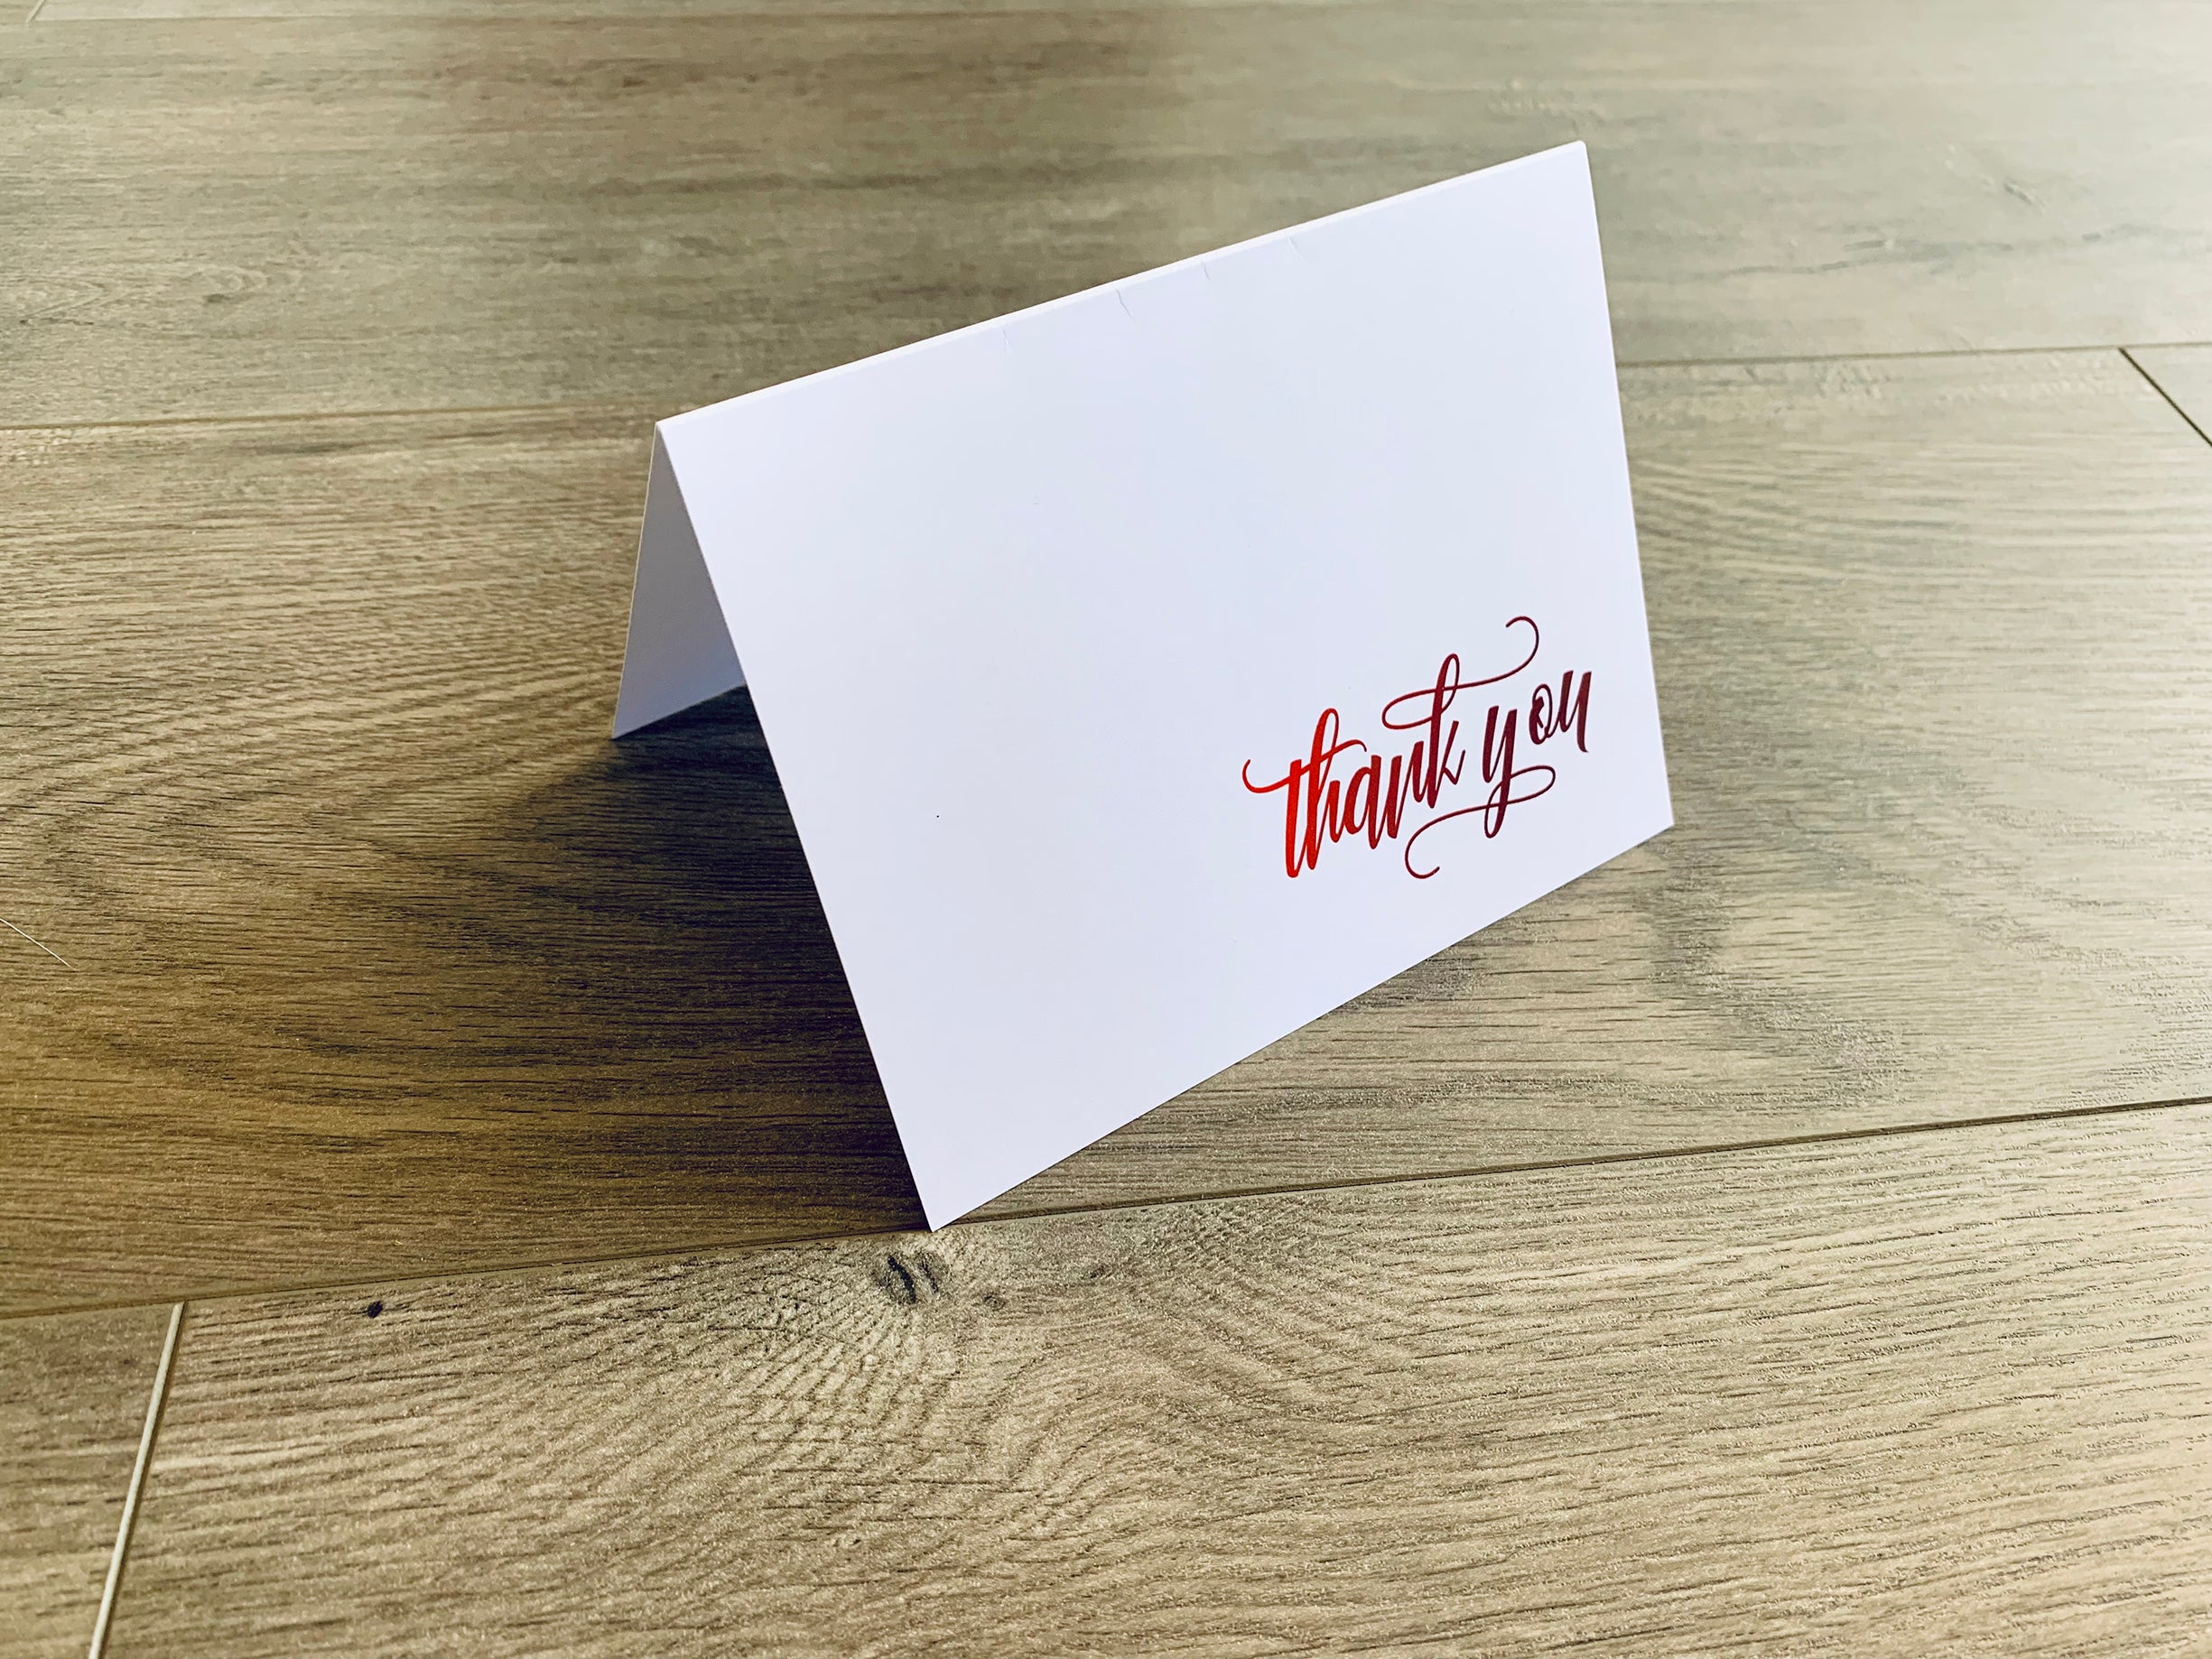 A white notecard with a script font that reads "thank you" sits on a wooden floor. The font fades from bright red to dark burgundy.